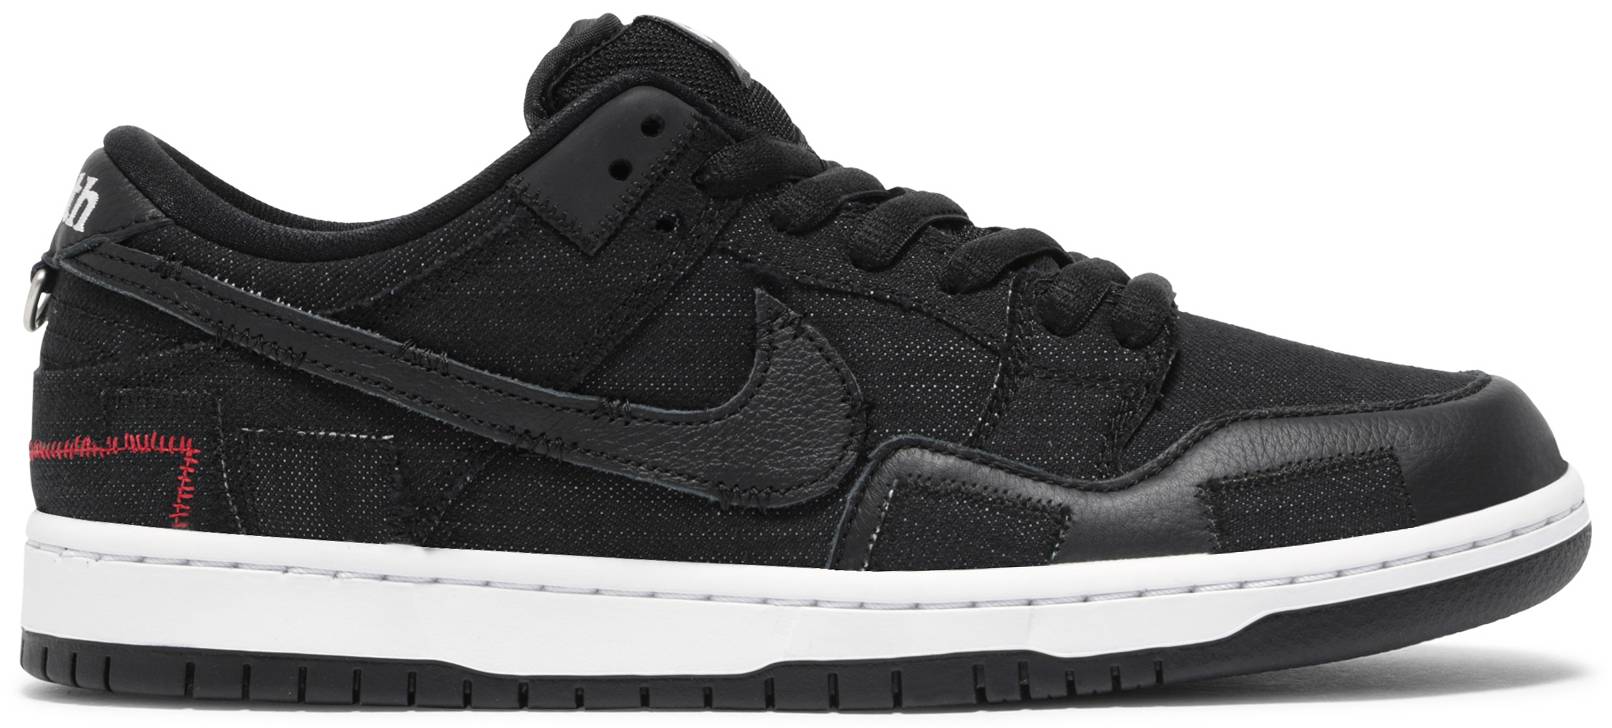 Nike SB Dunk Low Wasted Youth Men's